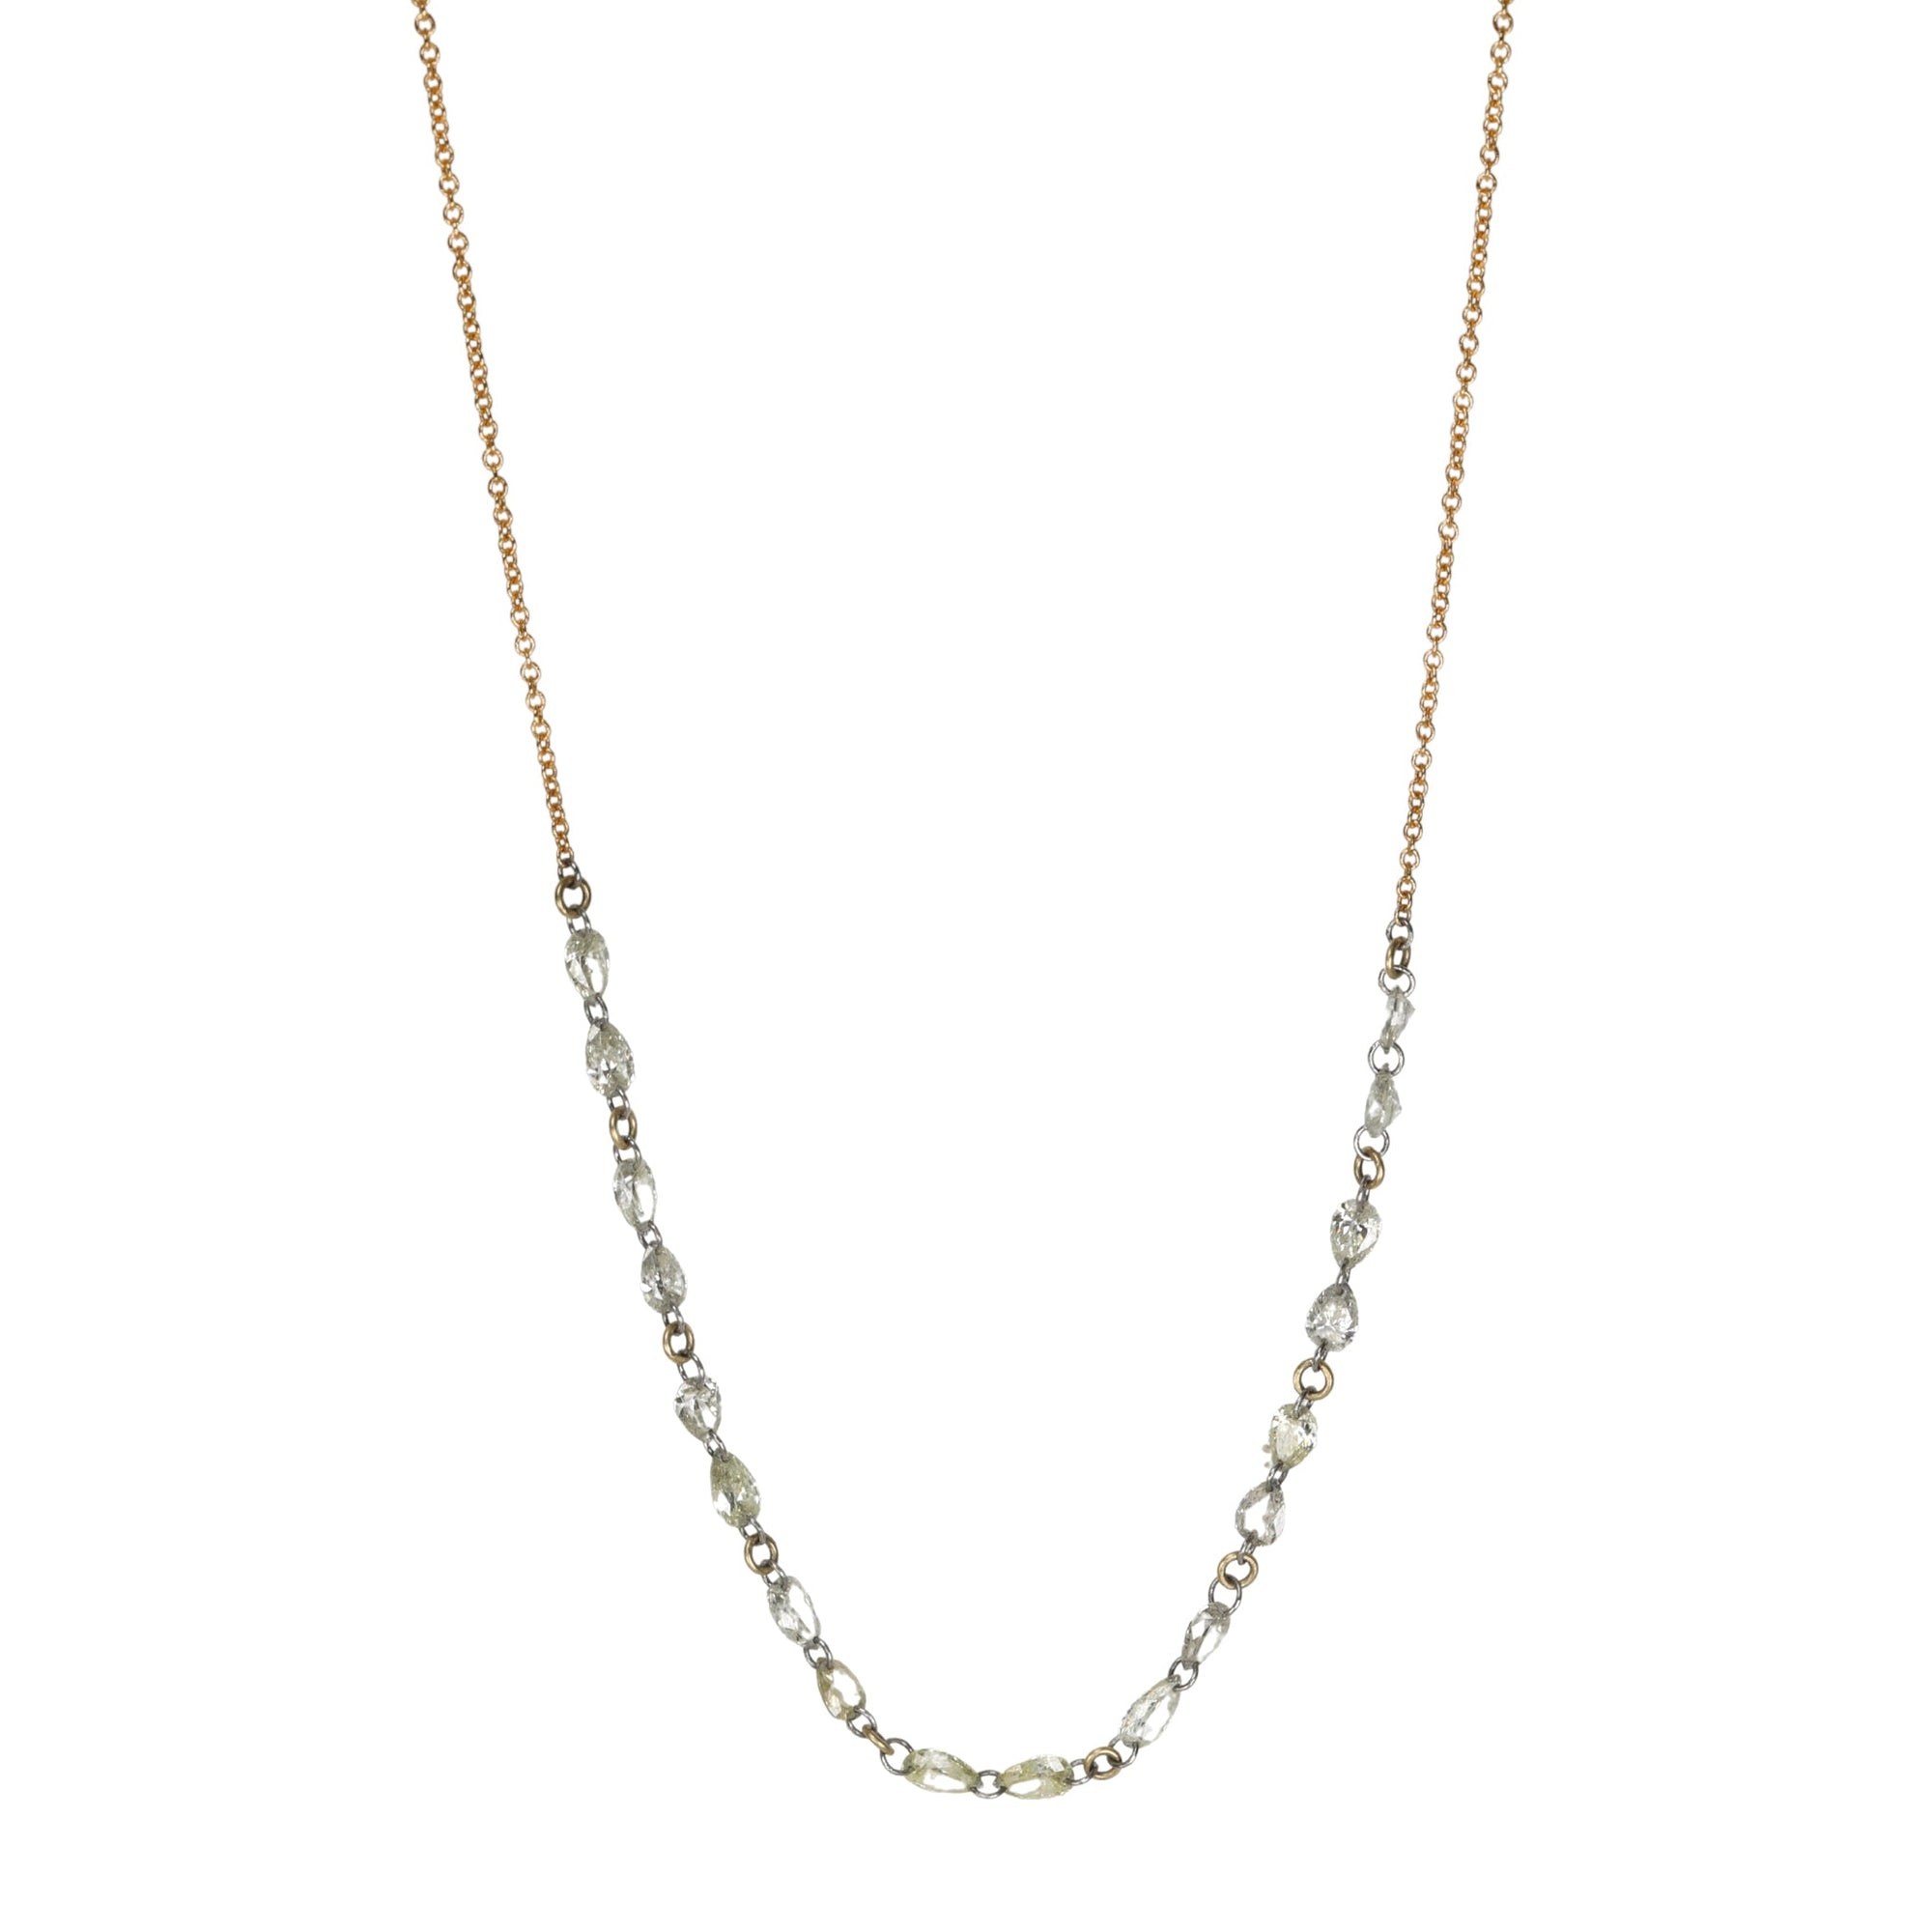 In-Line Free-Set Necklace with Mixed Pear Shaped Diamonds - Peridot Fine Jewelry - TAP by Todd Pownell